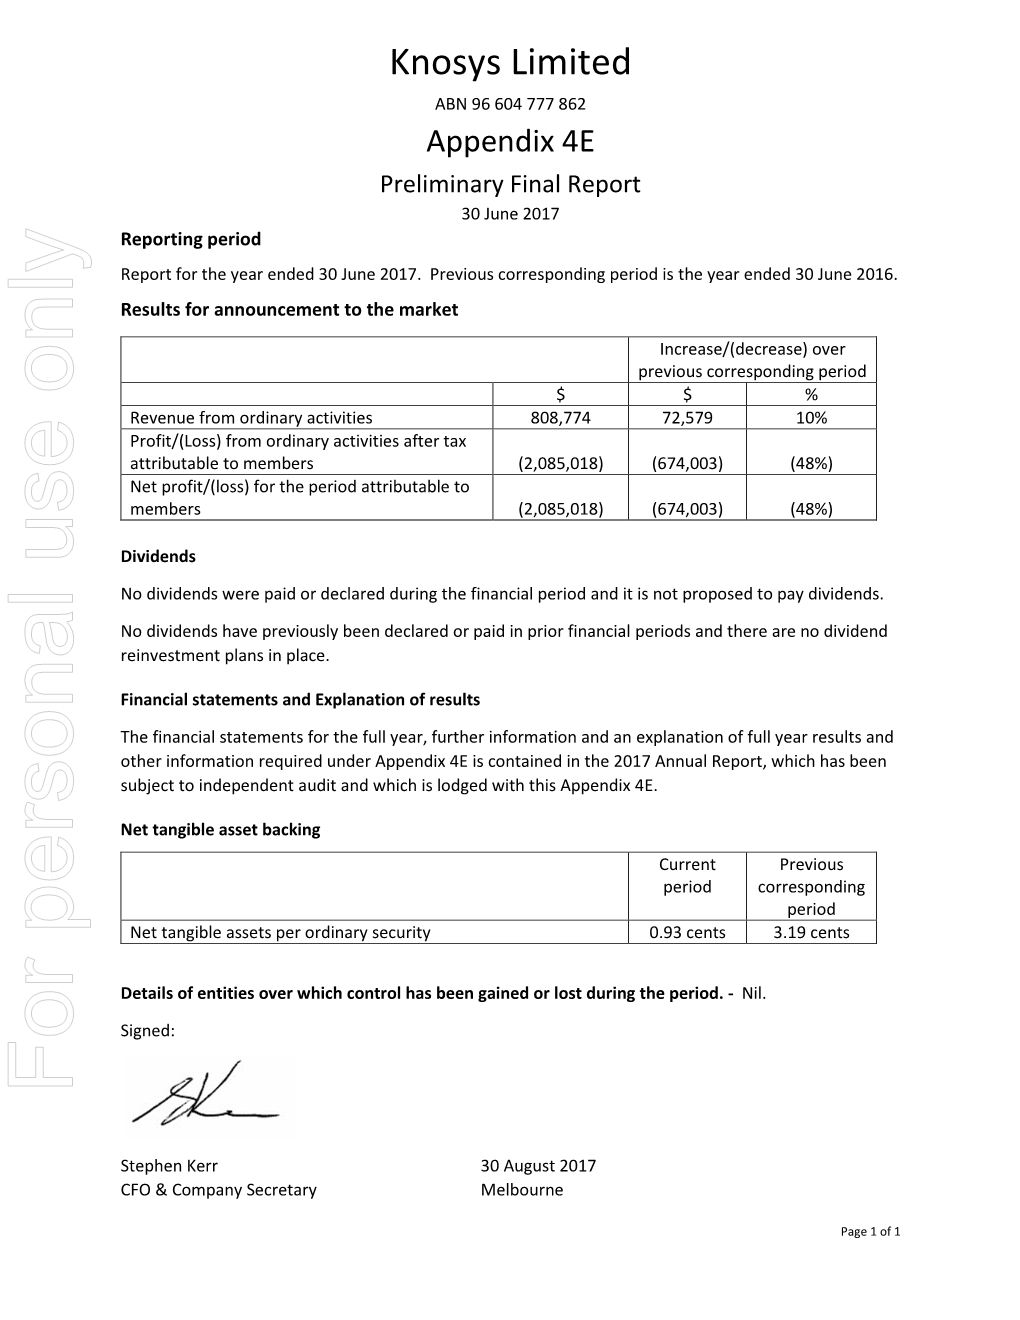 Knosys Limited ABN 96 604 777 862 Appendix 4E Preliminary Final Report 30 June 2017 Reporting Period Report for the Year Ended 30 June 2017